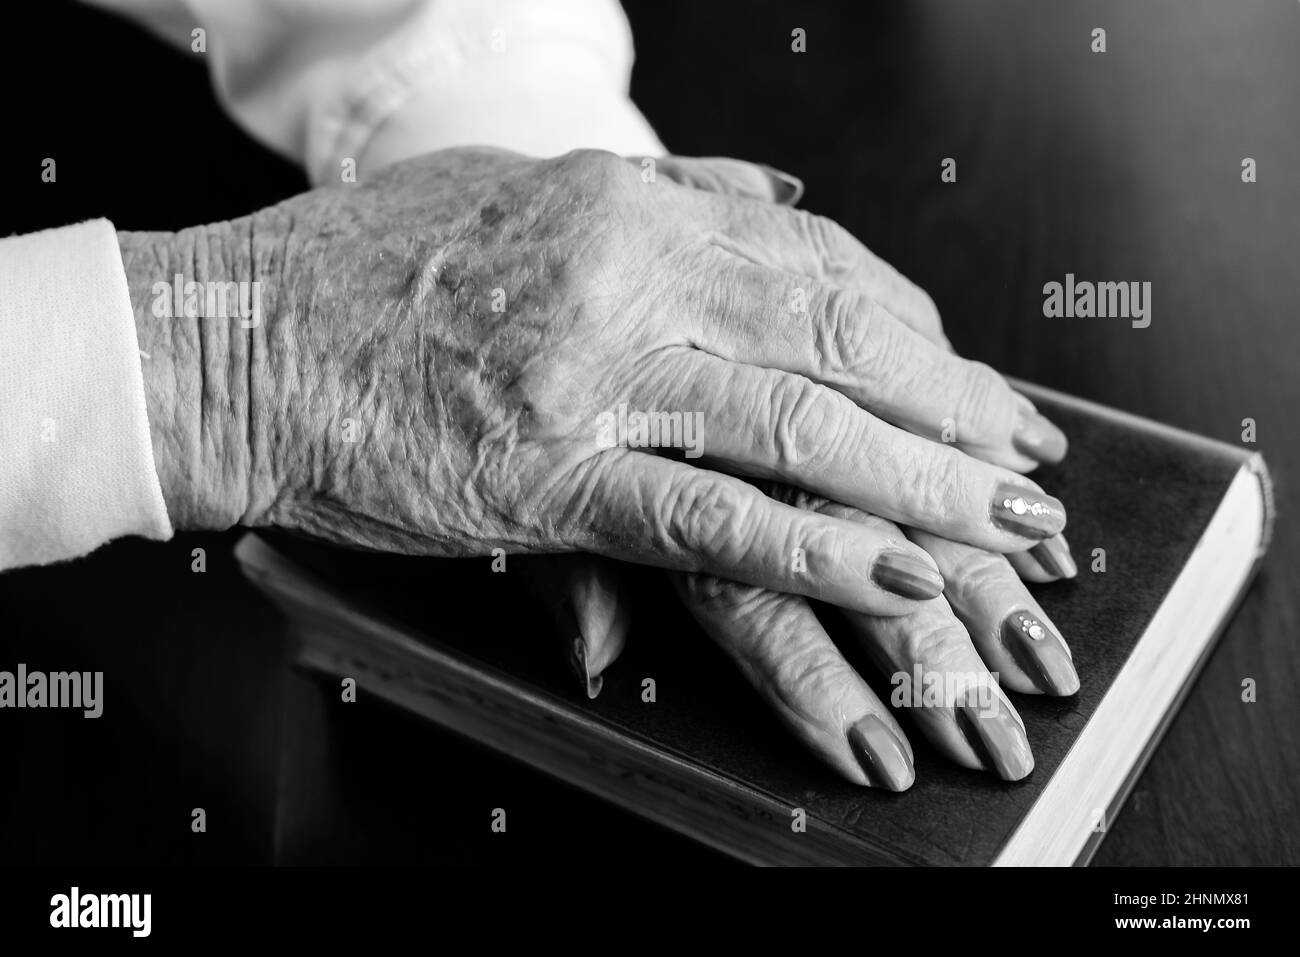 A close up concept photo of a pair of wringled and aged hands from an elederly woman. Stock Photo